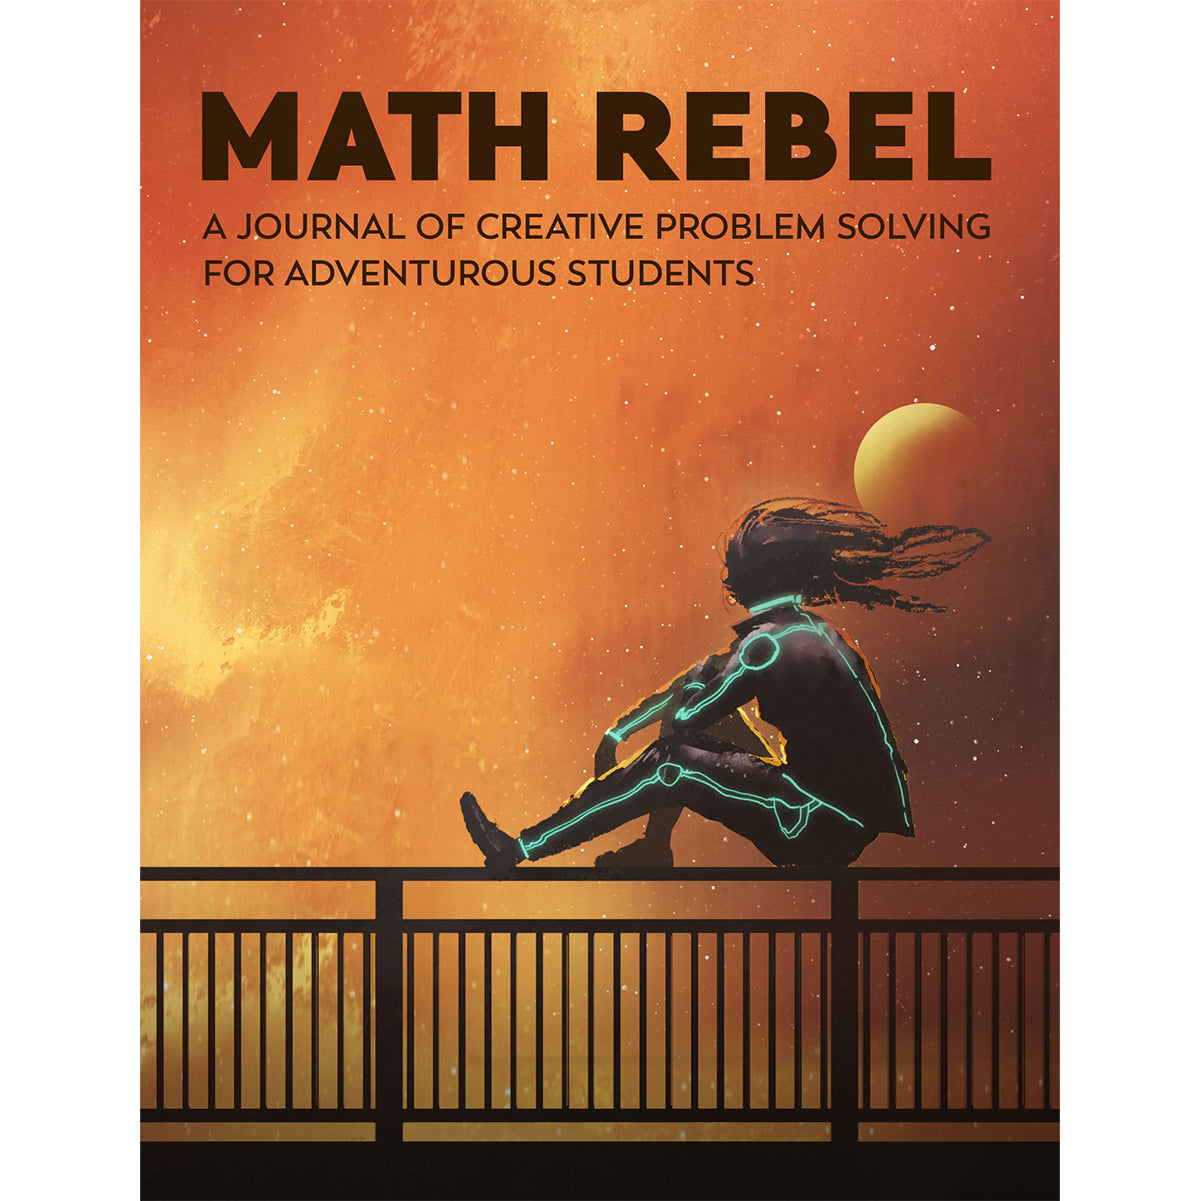 Math Rebel journaling pages printable math activity book by Denise Gaskins